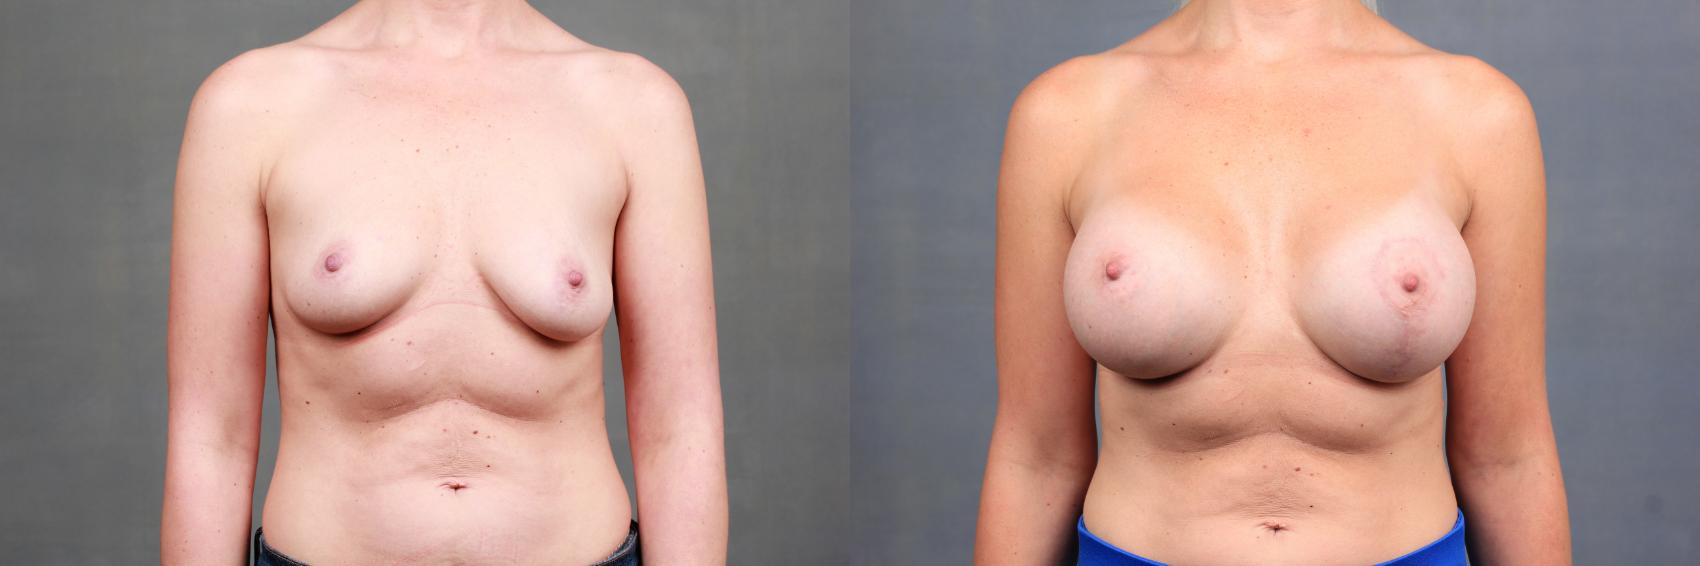 Before & After Enlargement - Silicone Case 759 Front View in Louisville & Lexington, KY